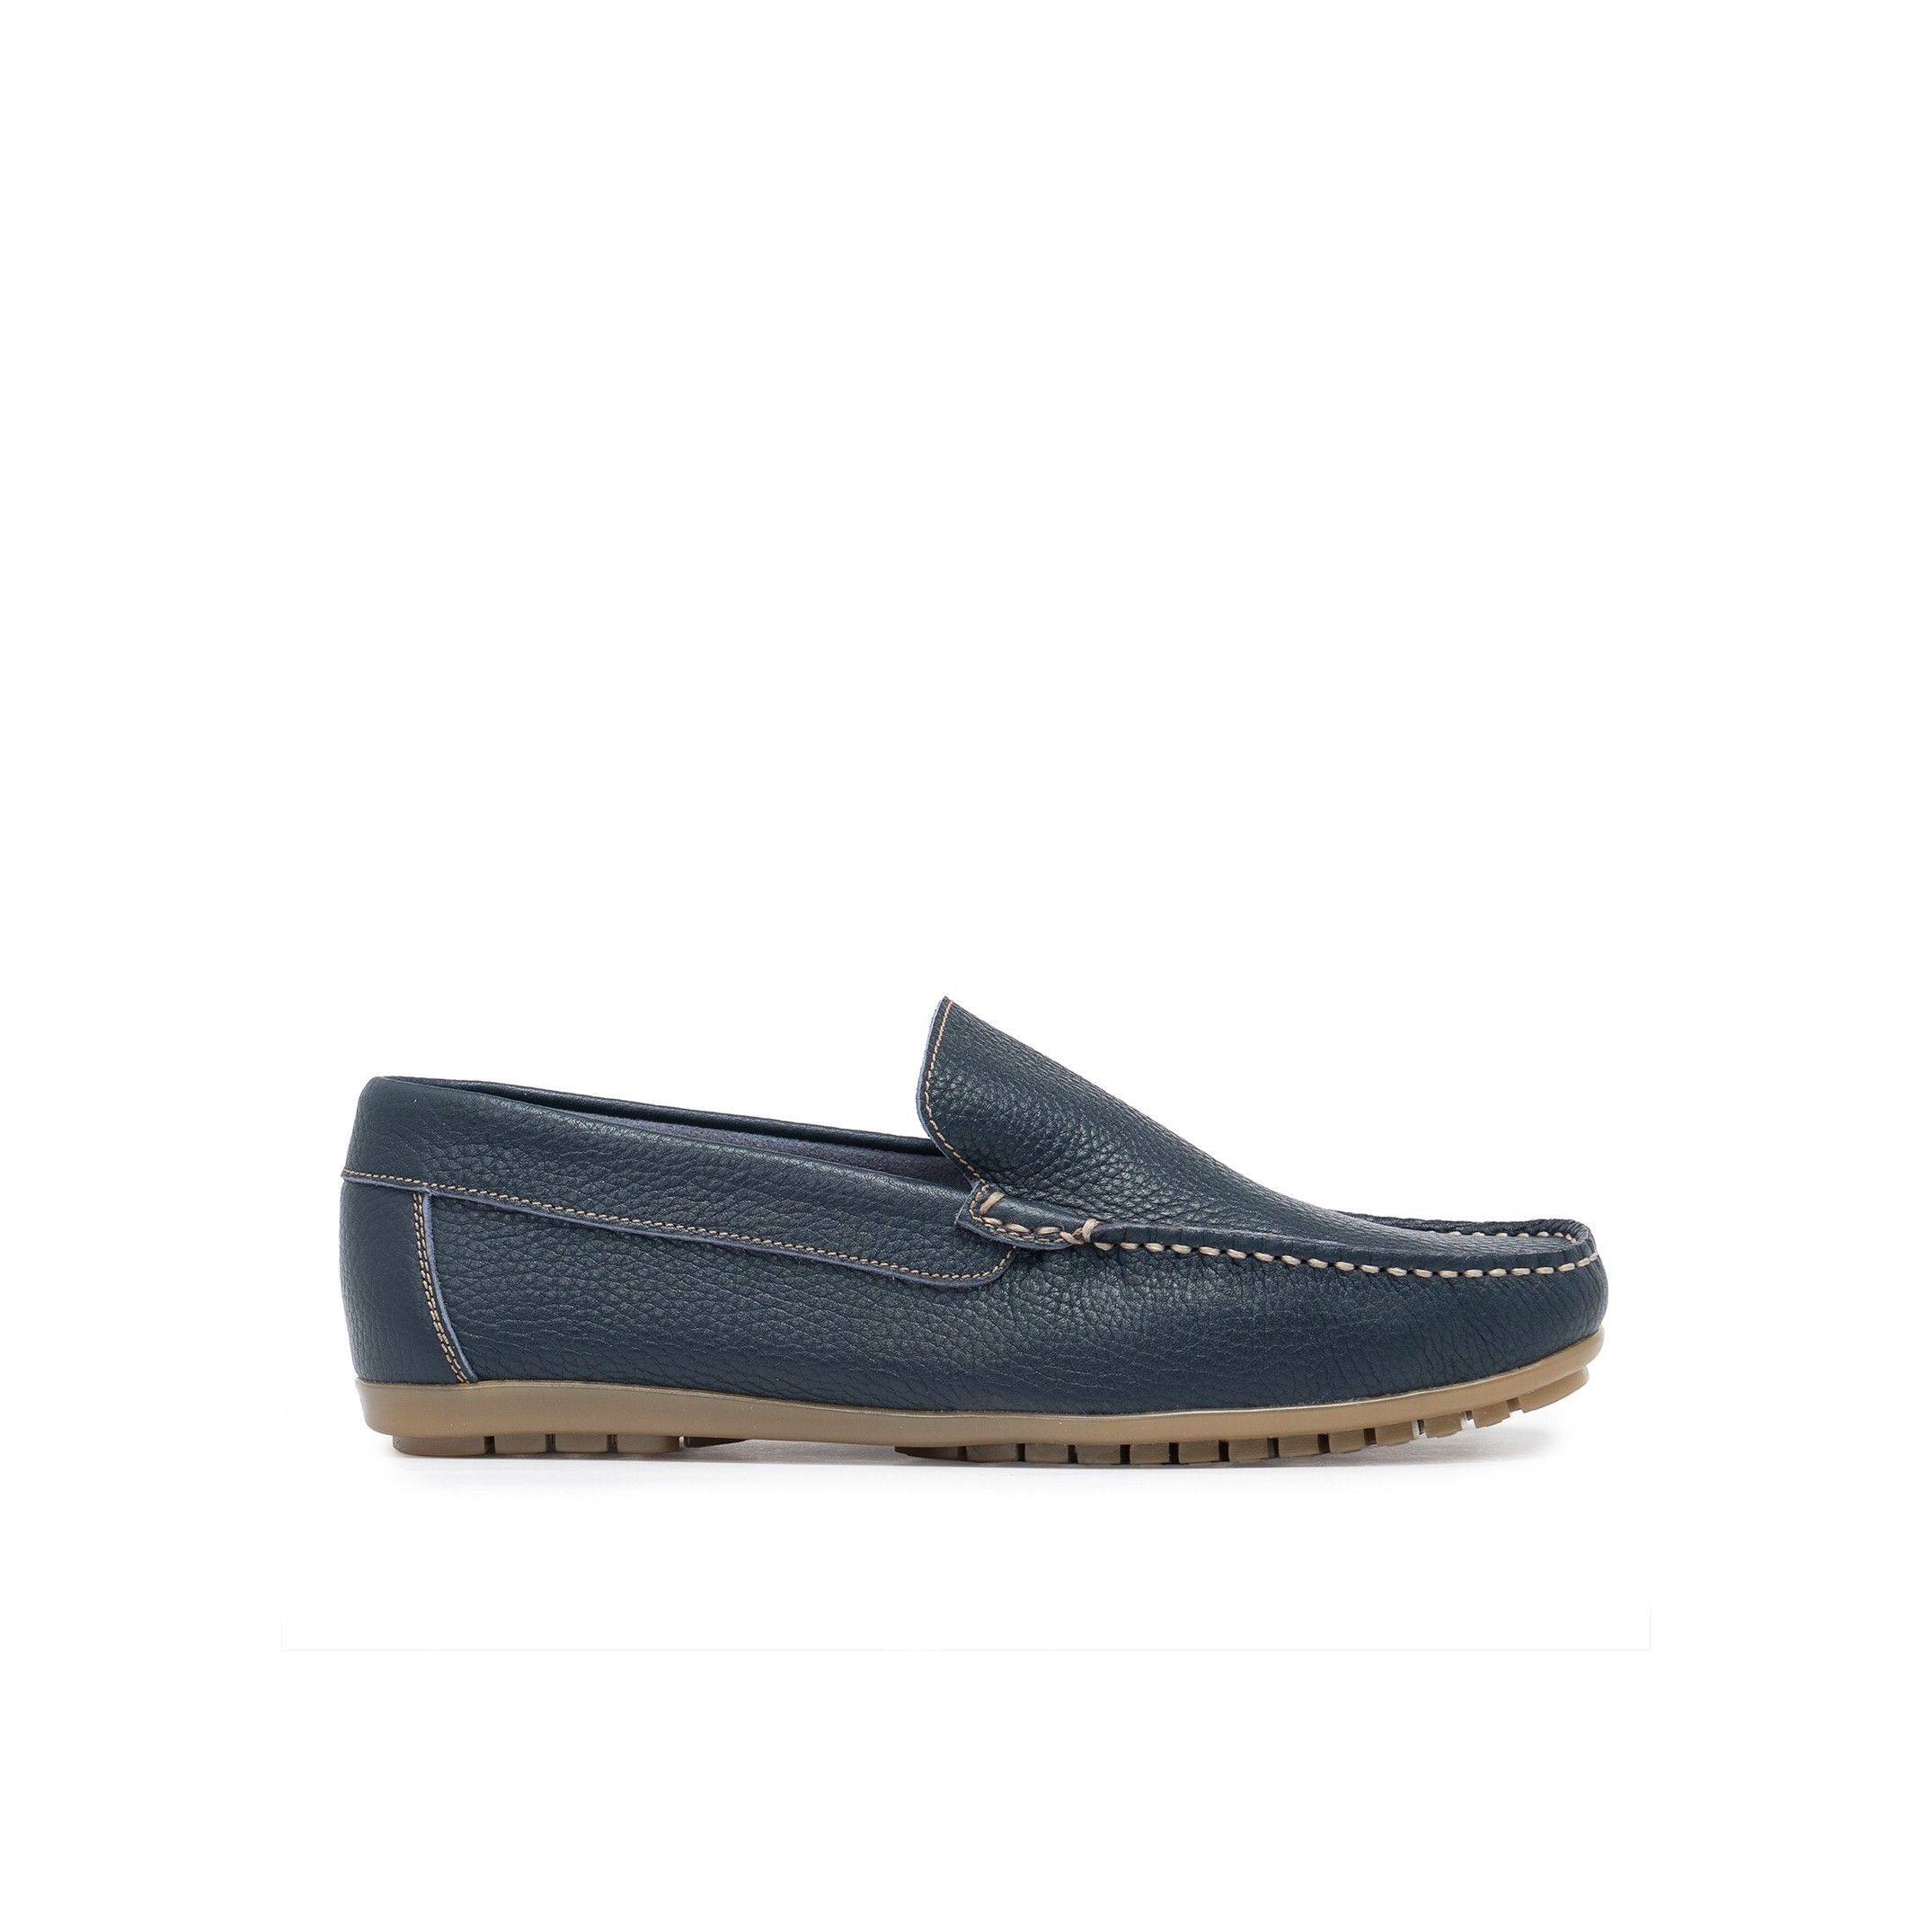 Nappa leather loafers by Son Castellanisimos. Upper made of cowhide leather. Open shoe with inner and insole made of cowhide leather. Sole material: synthetic and non slip. Heel height: 1 cm. Designed and made in Spain.